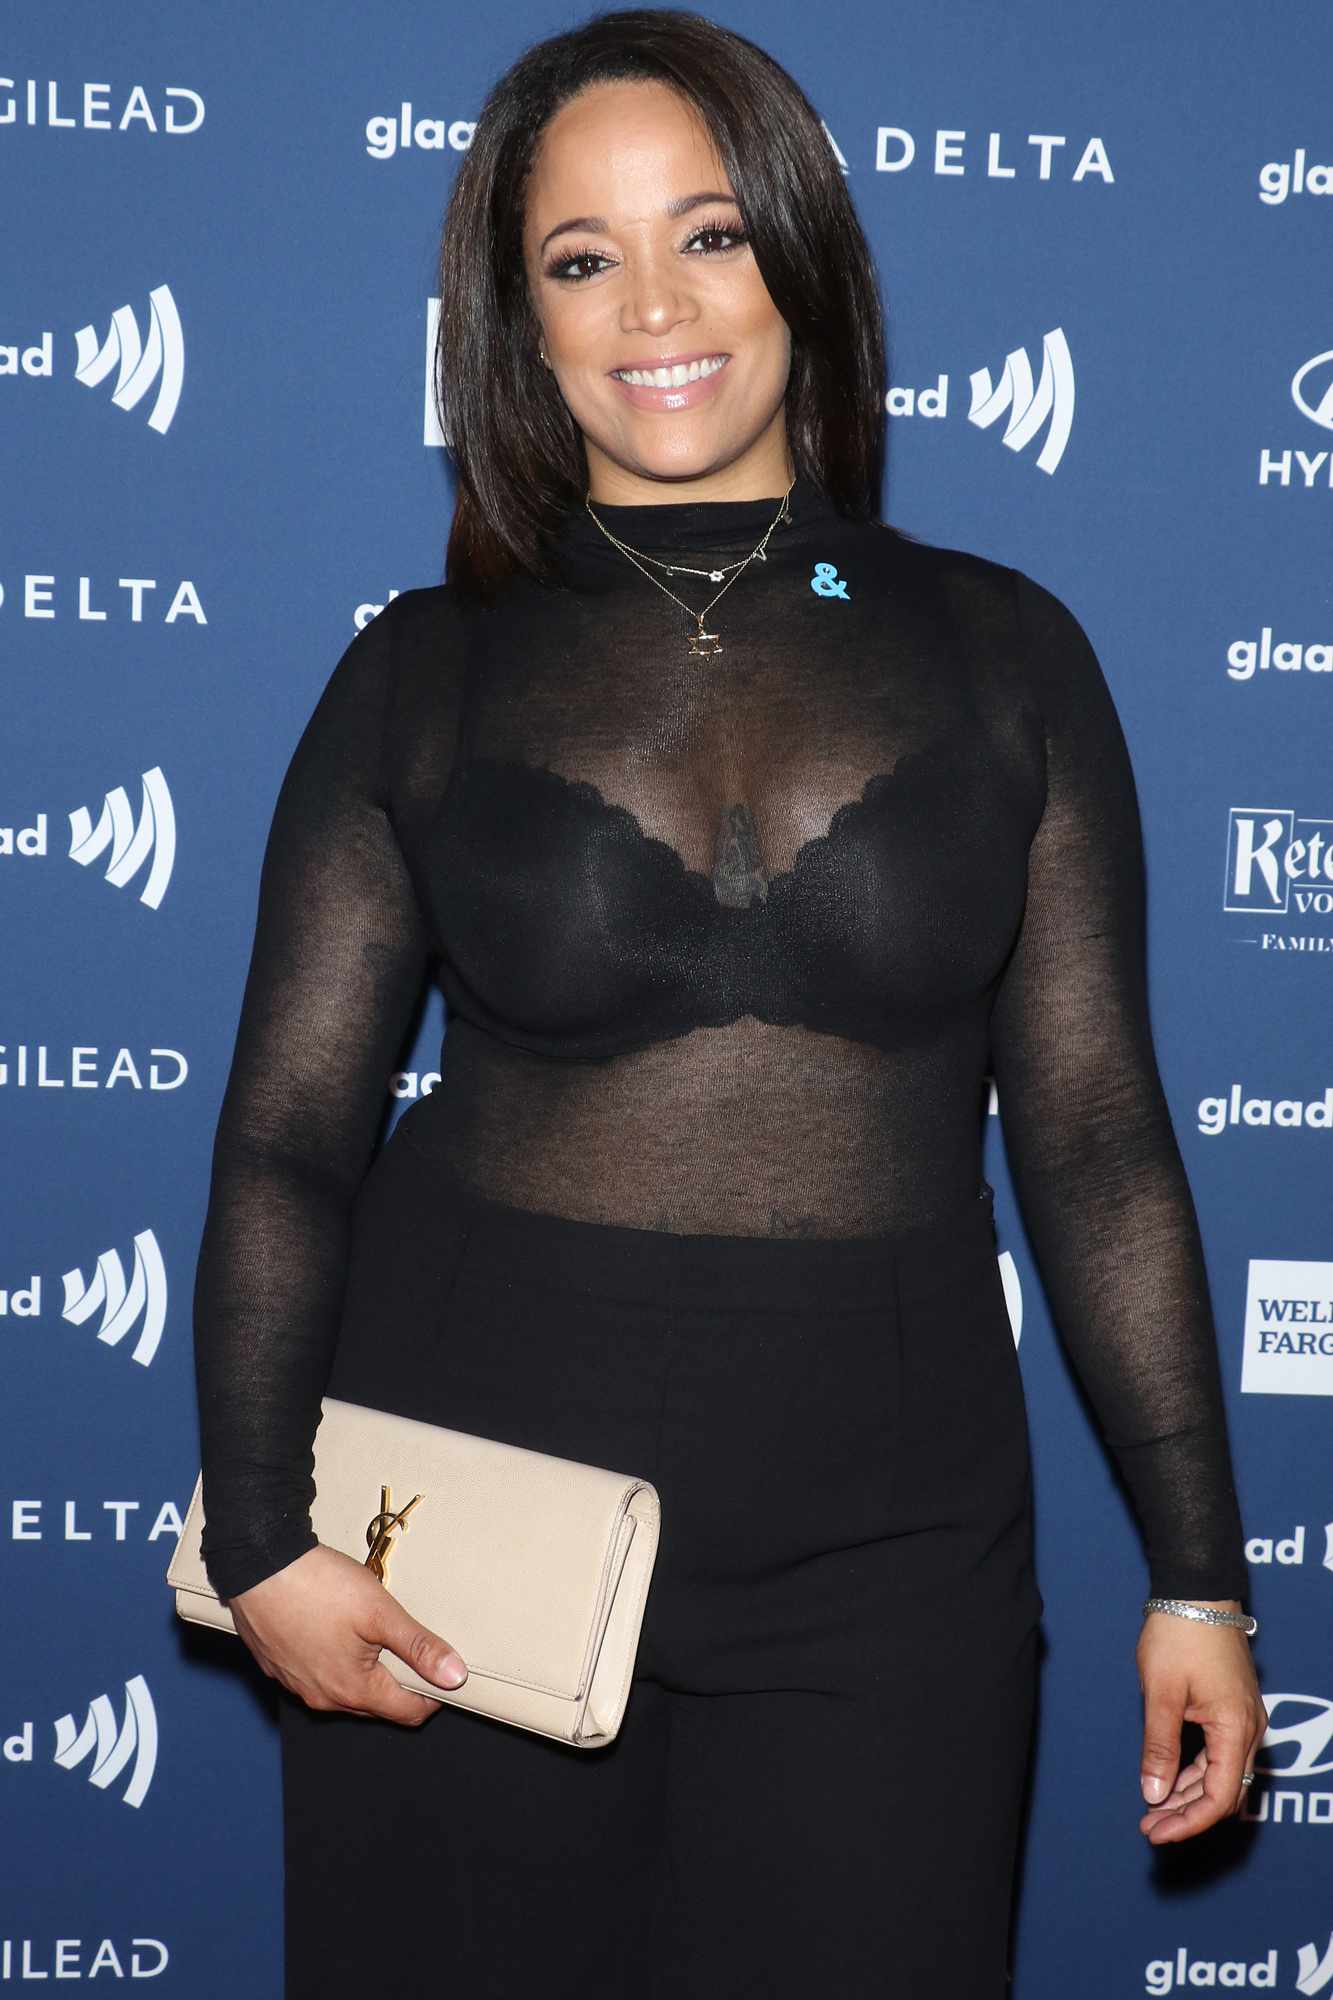 Aneesa Ferreira attends the 30th Annual GLAAD Media Awards at New York Hilton Midtown on May 04, 2019 in New York City. 